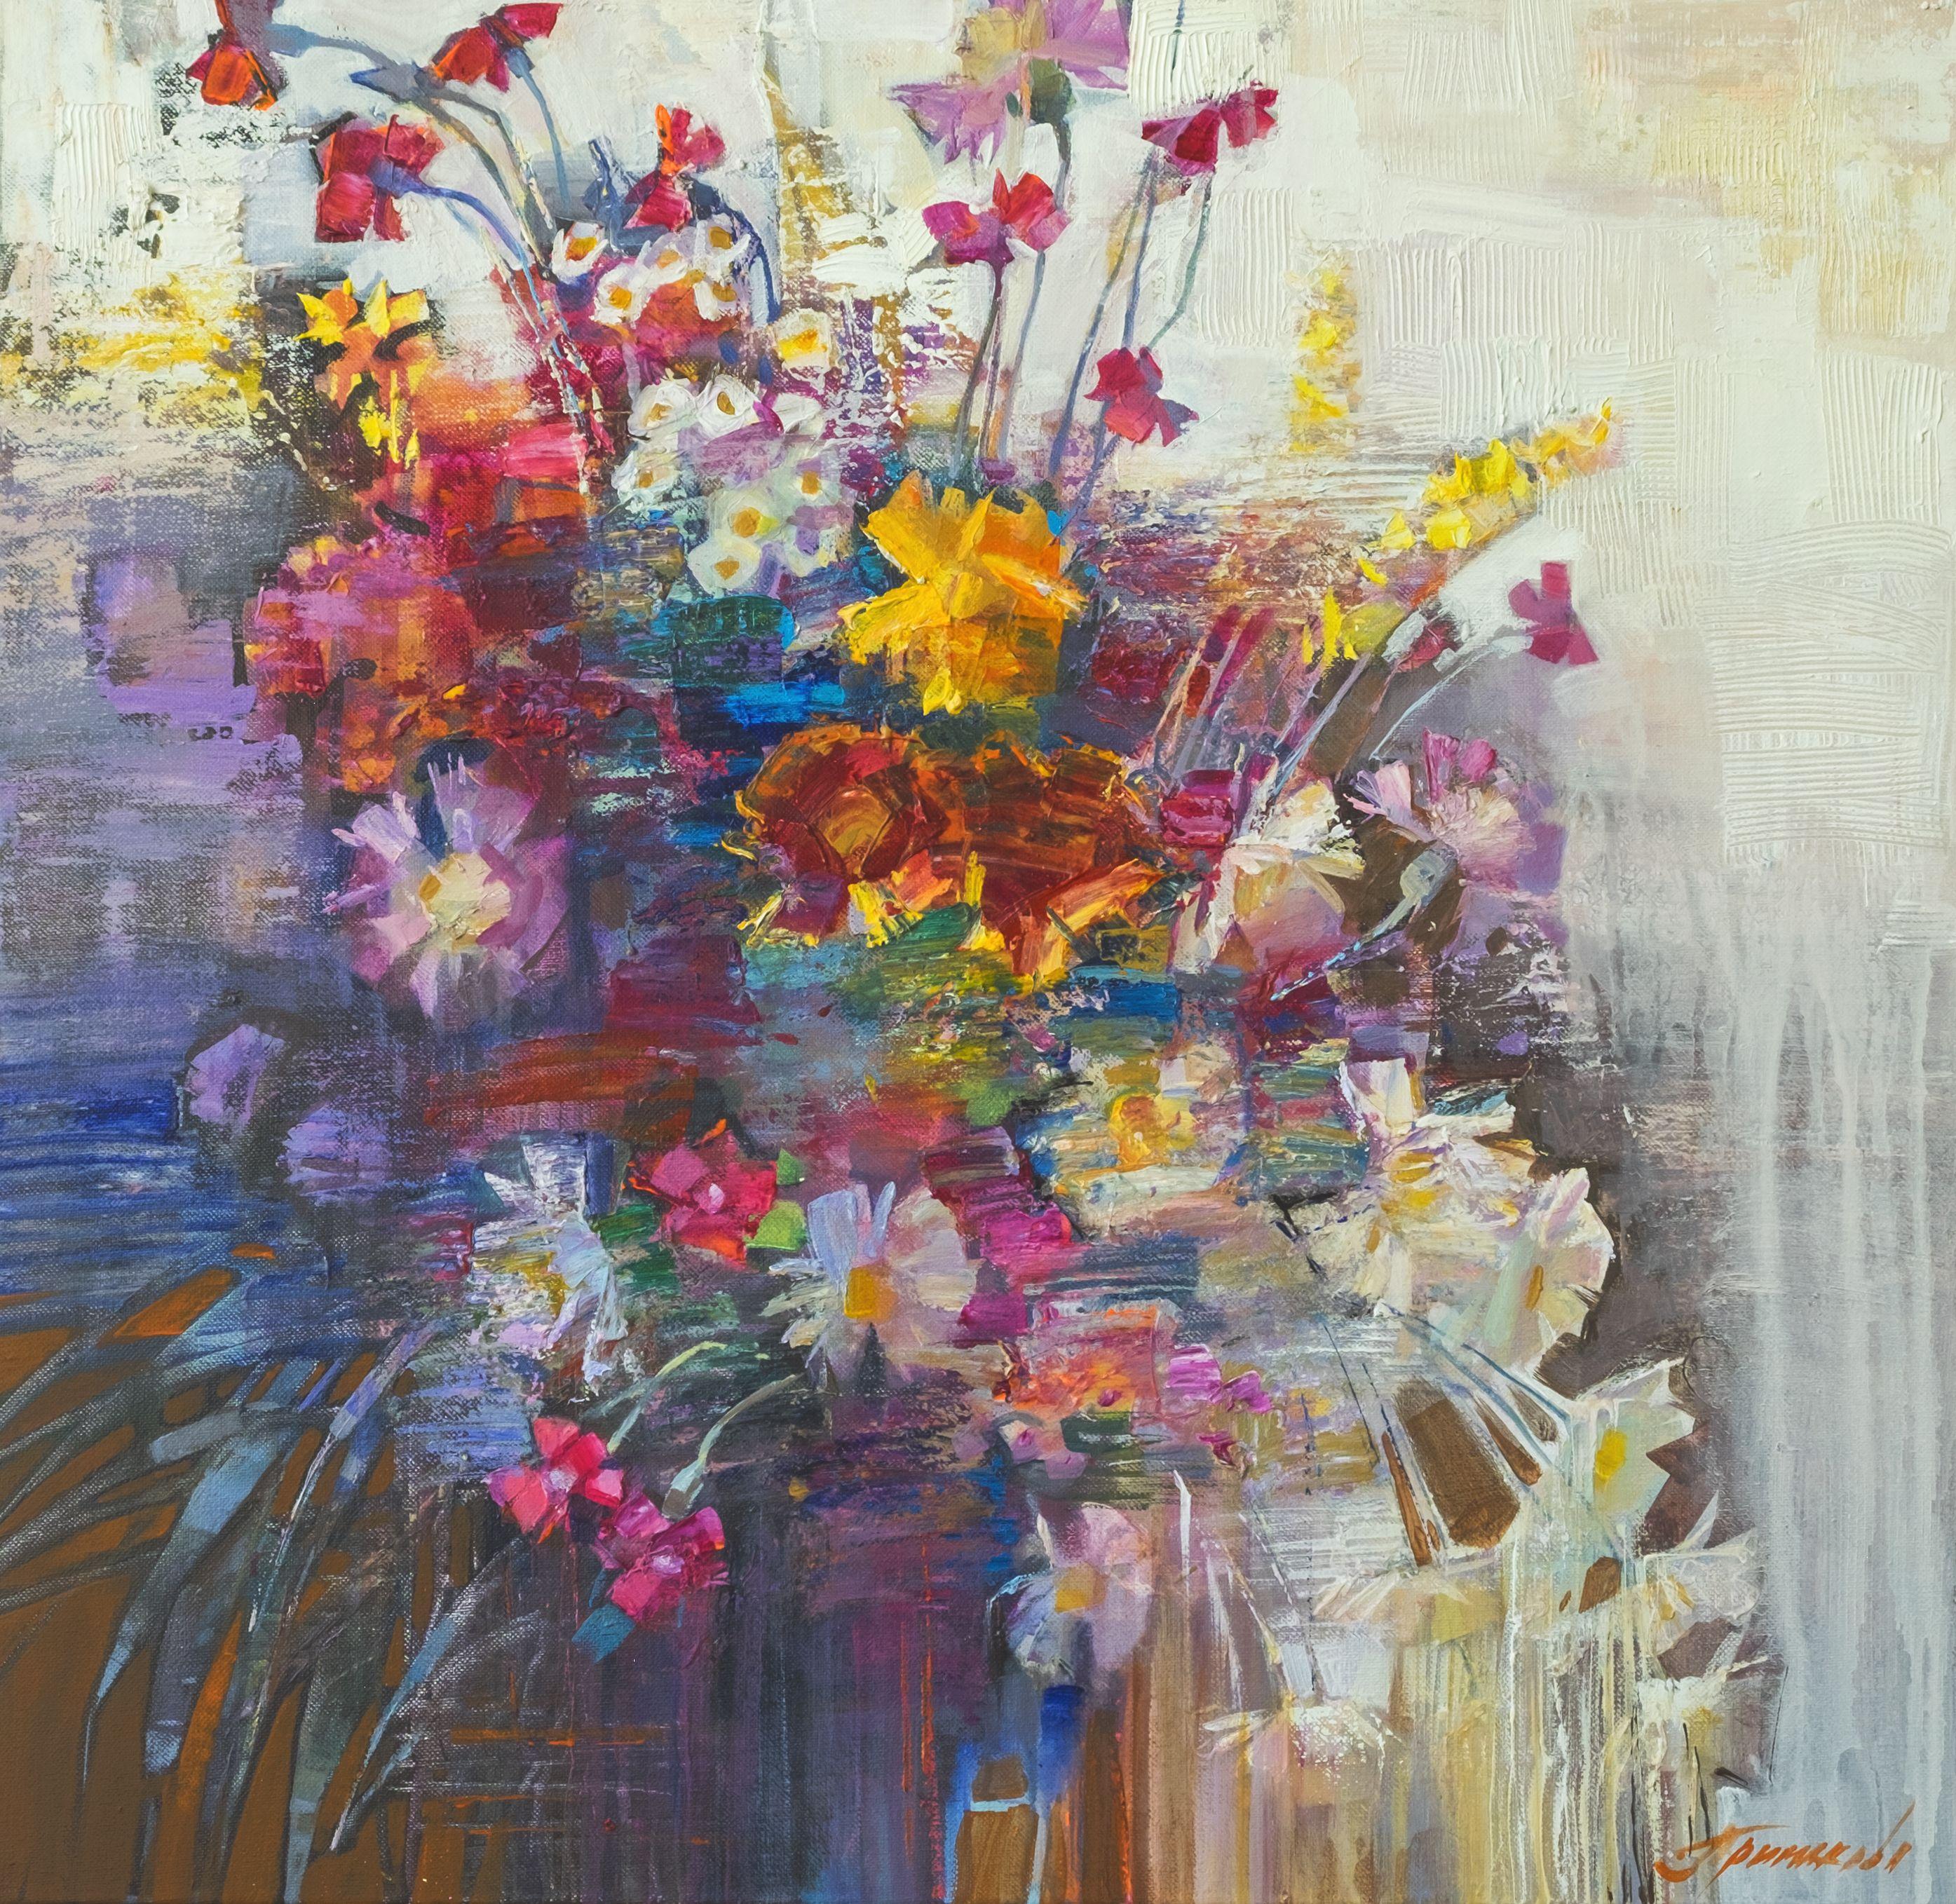 The artwork is a prominent representative of contemporary Ukrainian art, which is increasingly valued in the art world.    The artwork "Wildflowers" is made with acrylic paints, which made it possible to use various complex techniques    This